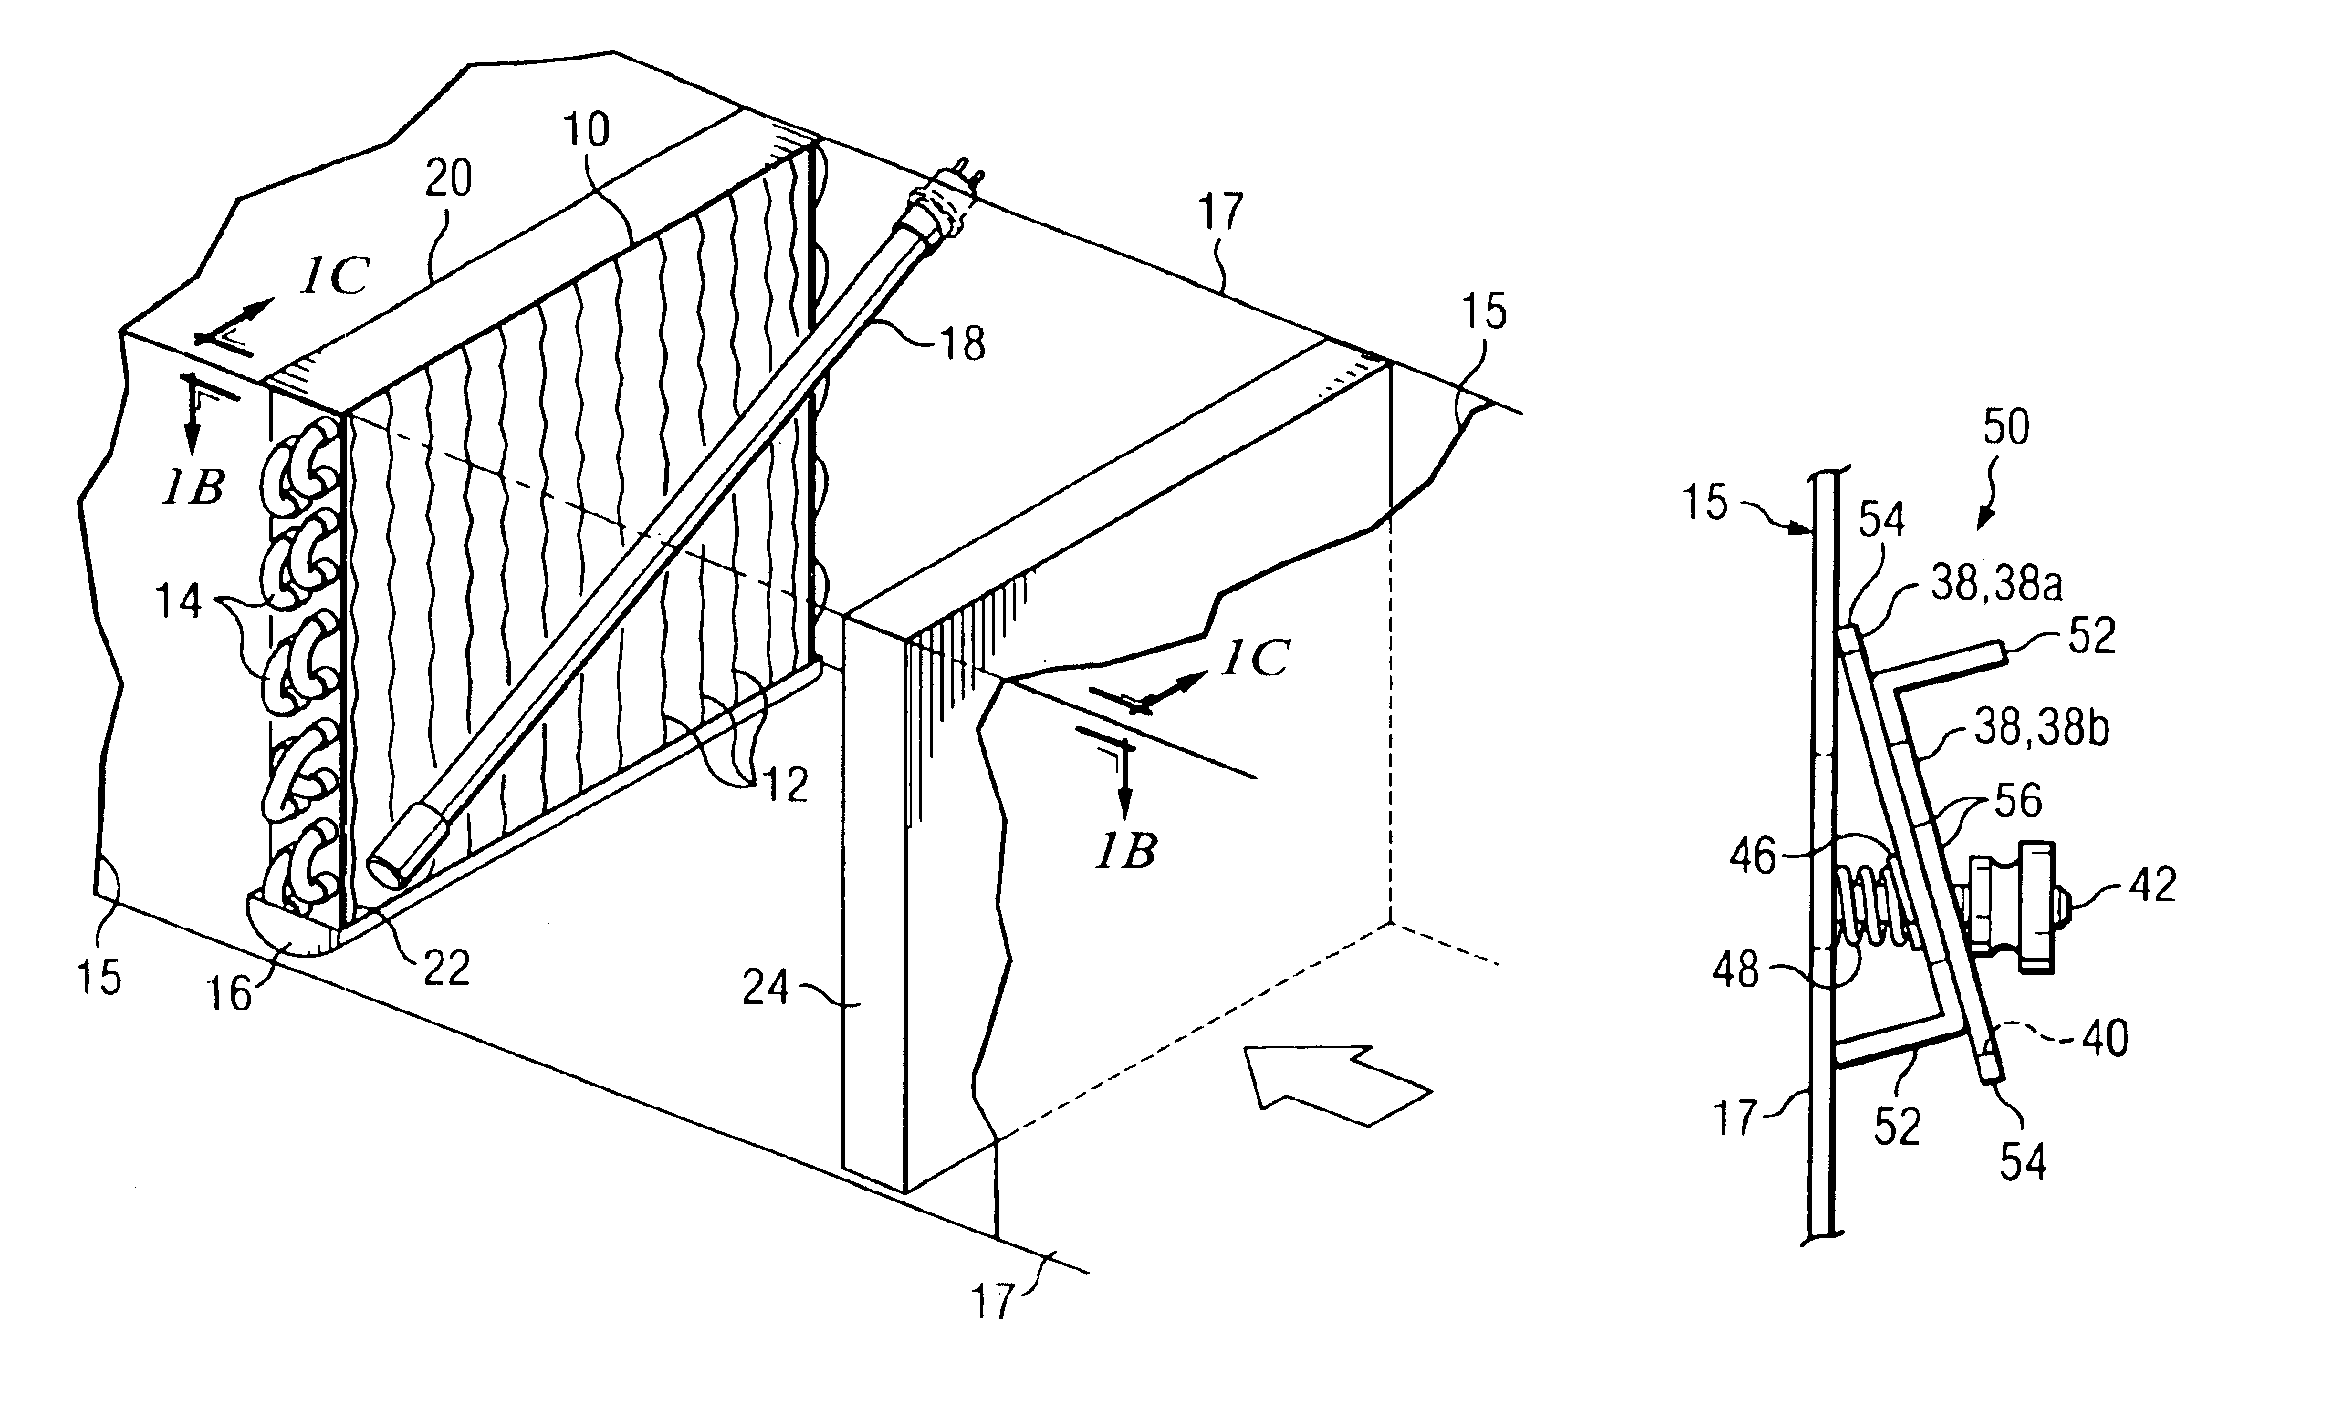 Germicidal lamp retaining assembly